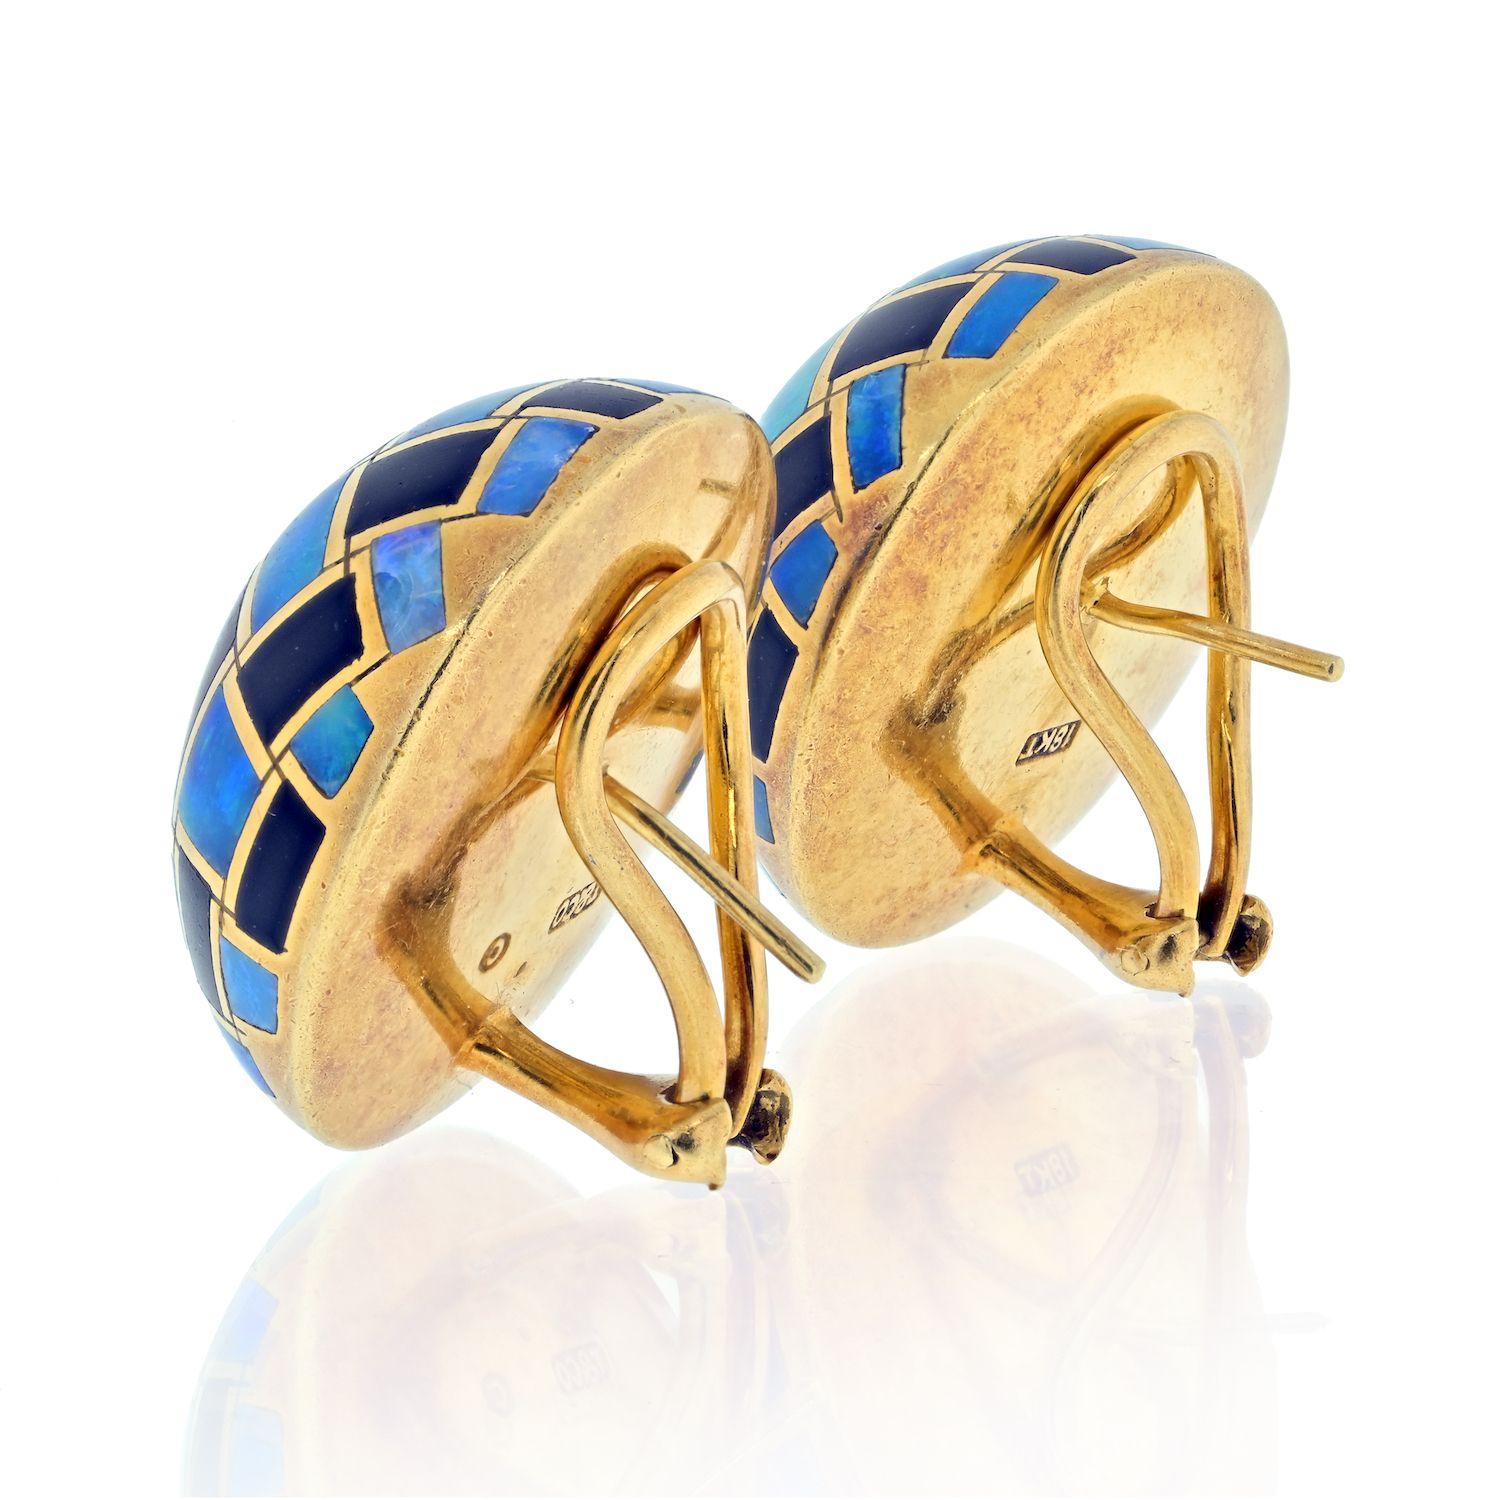 A pair of black jade and opal checkerboard patterned dome earrings, in 18k gold. Angela Cummings for Tiffany & Co.
Posts and clip-backs. Diameters 1 inch.